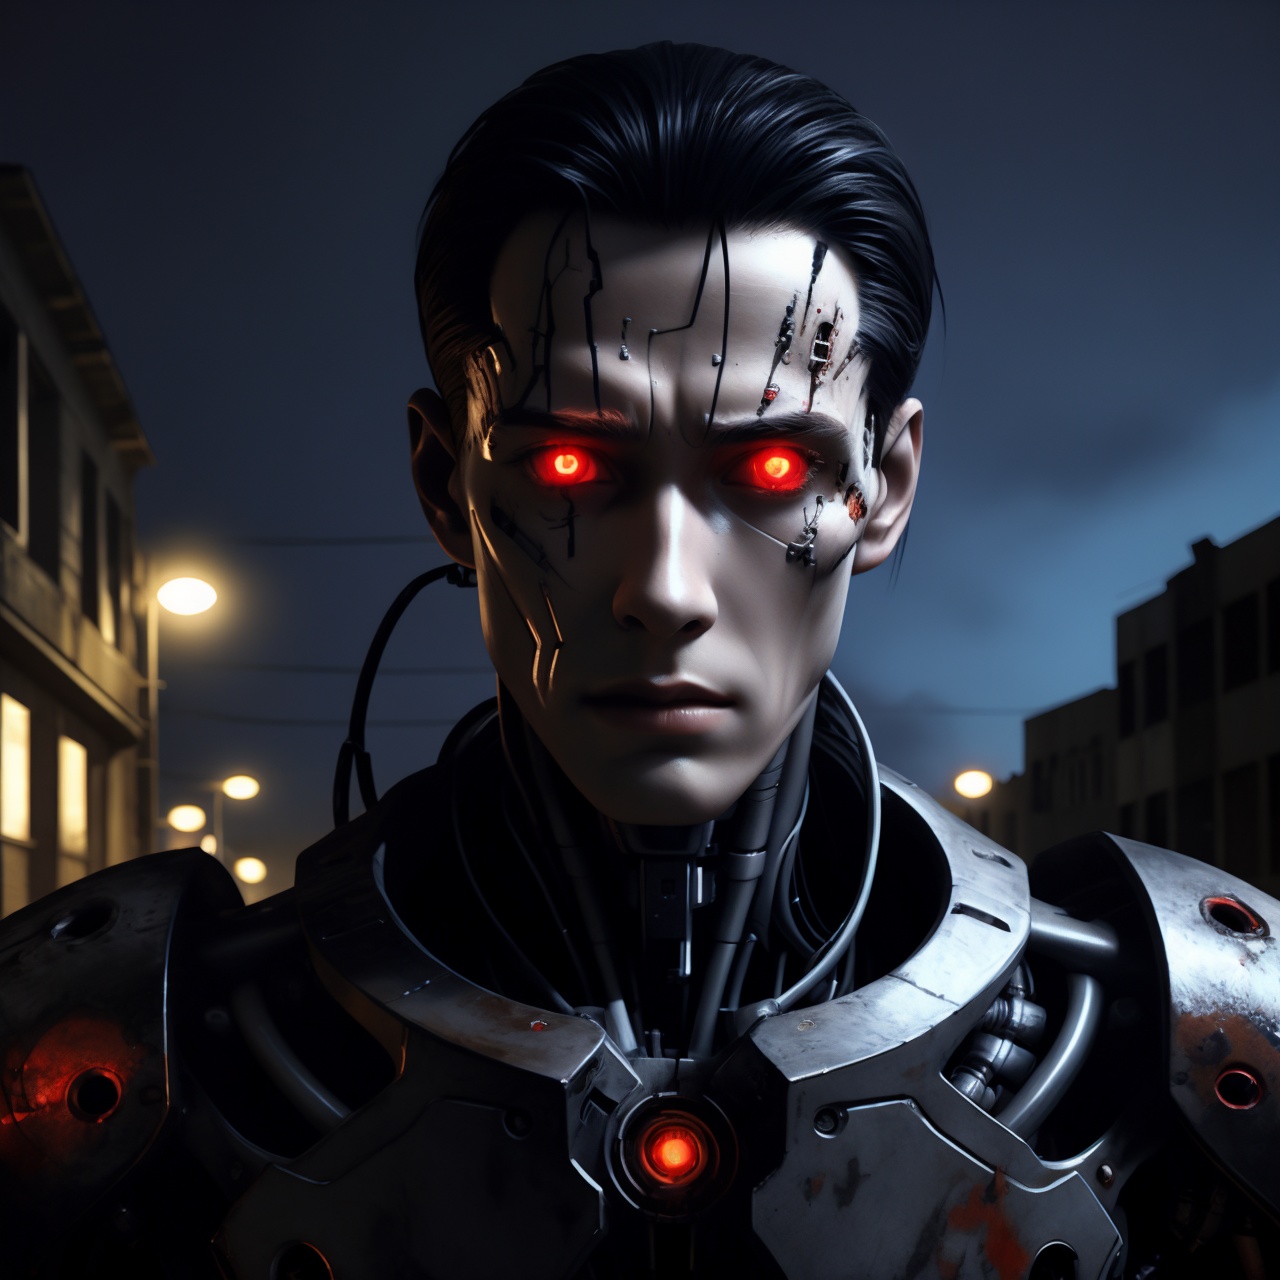 a t800 cyborg walking through a ruined city at night, close up, photorealistic, realistic, dark, horror, frightening, glowing red eyes, t800, cyborg, sky, smoke, buildings